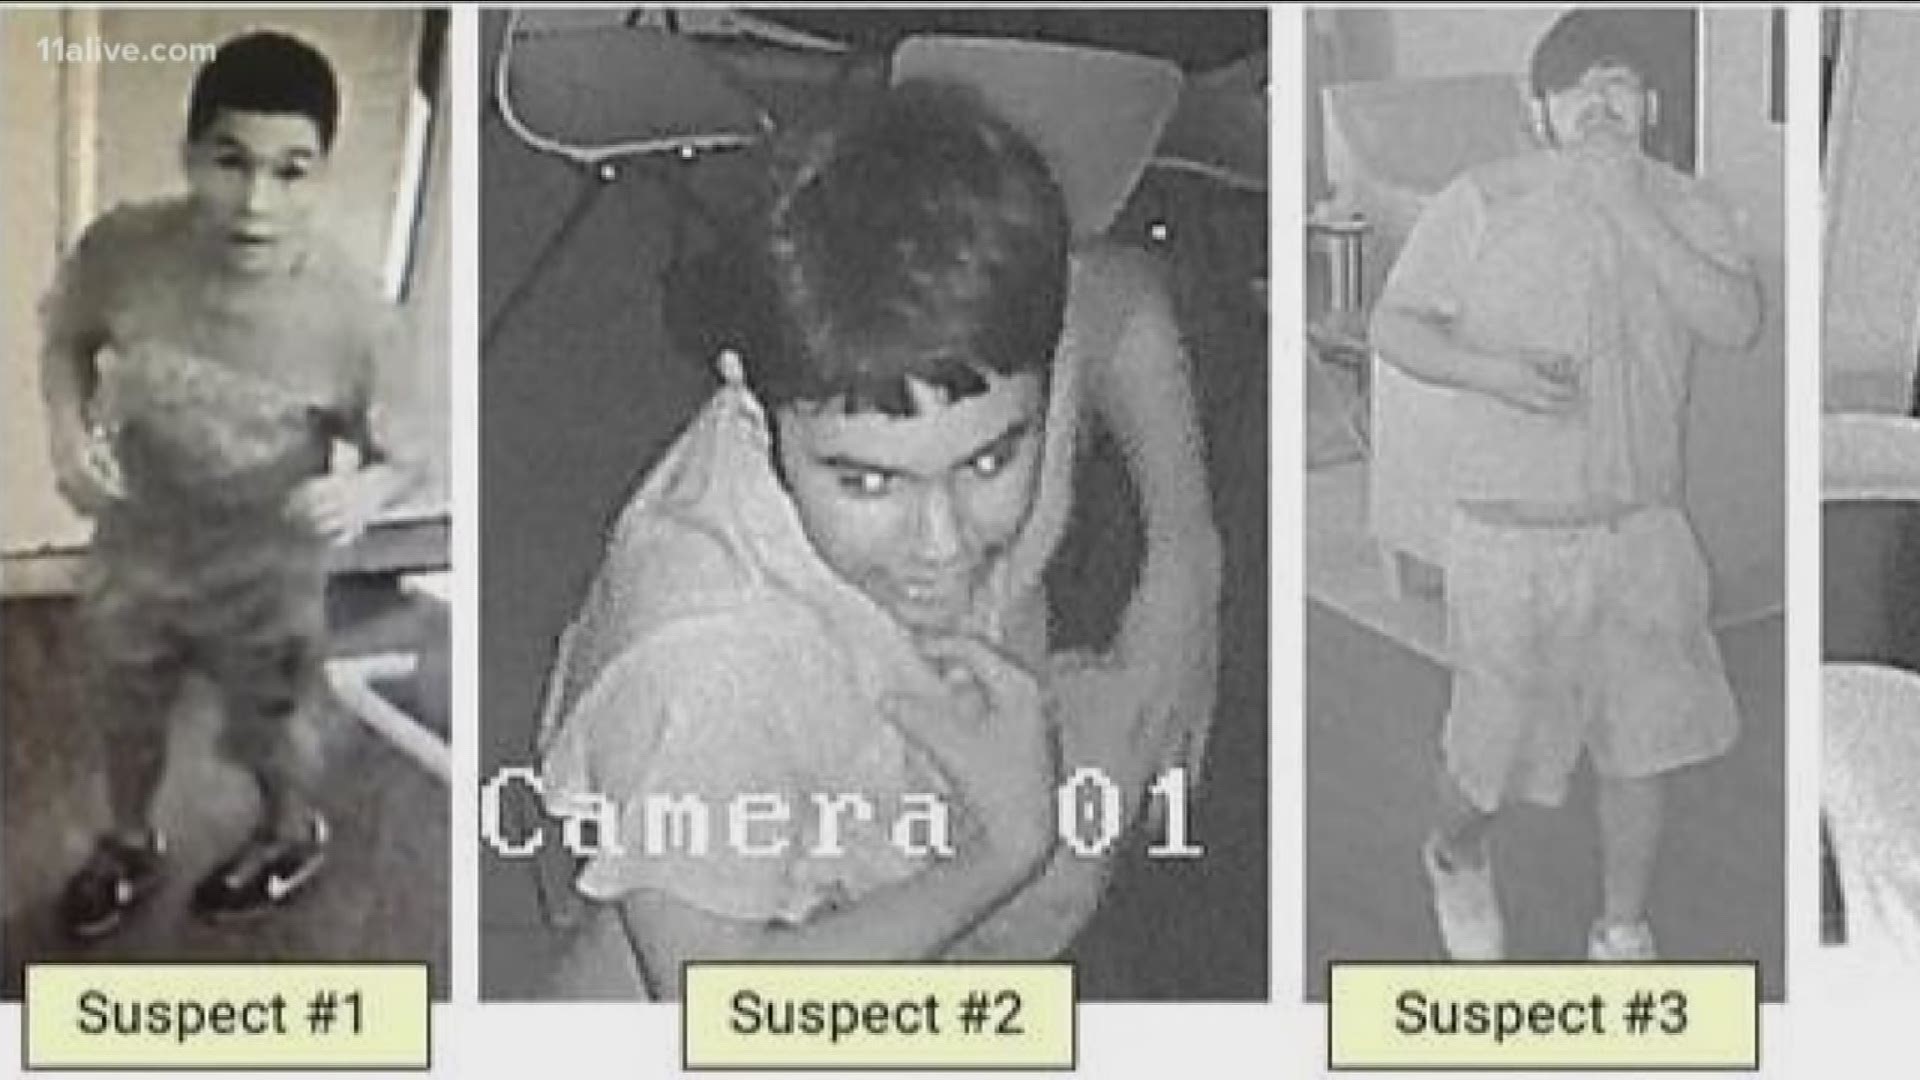 Call police if you recognize these people.